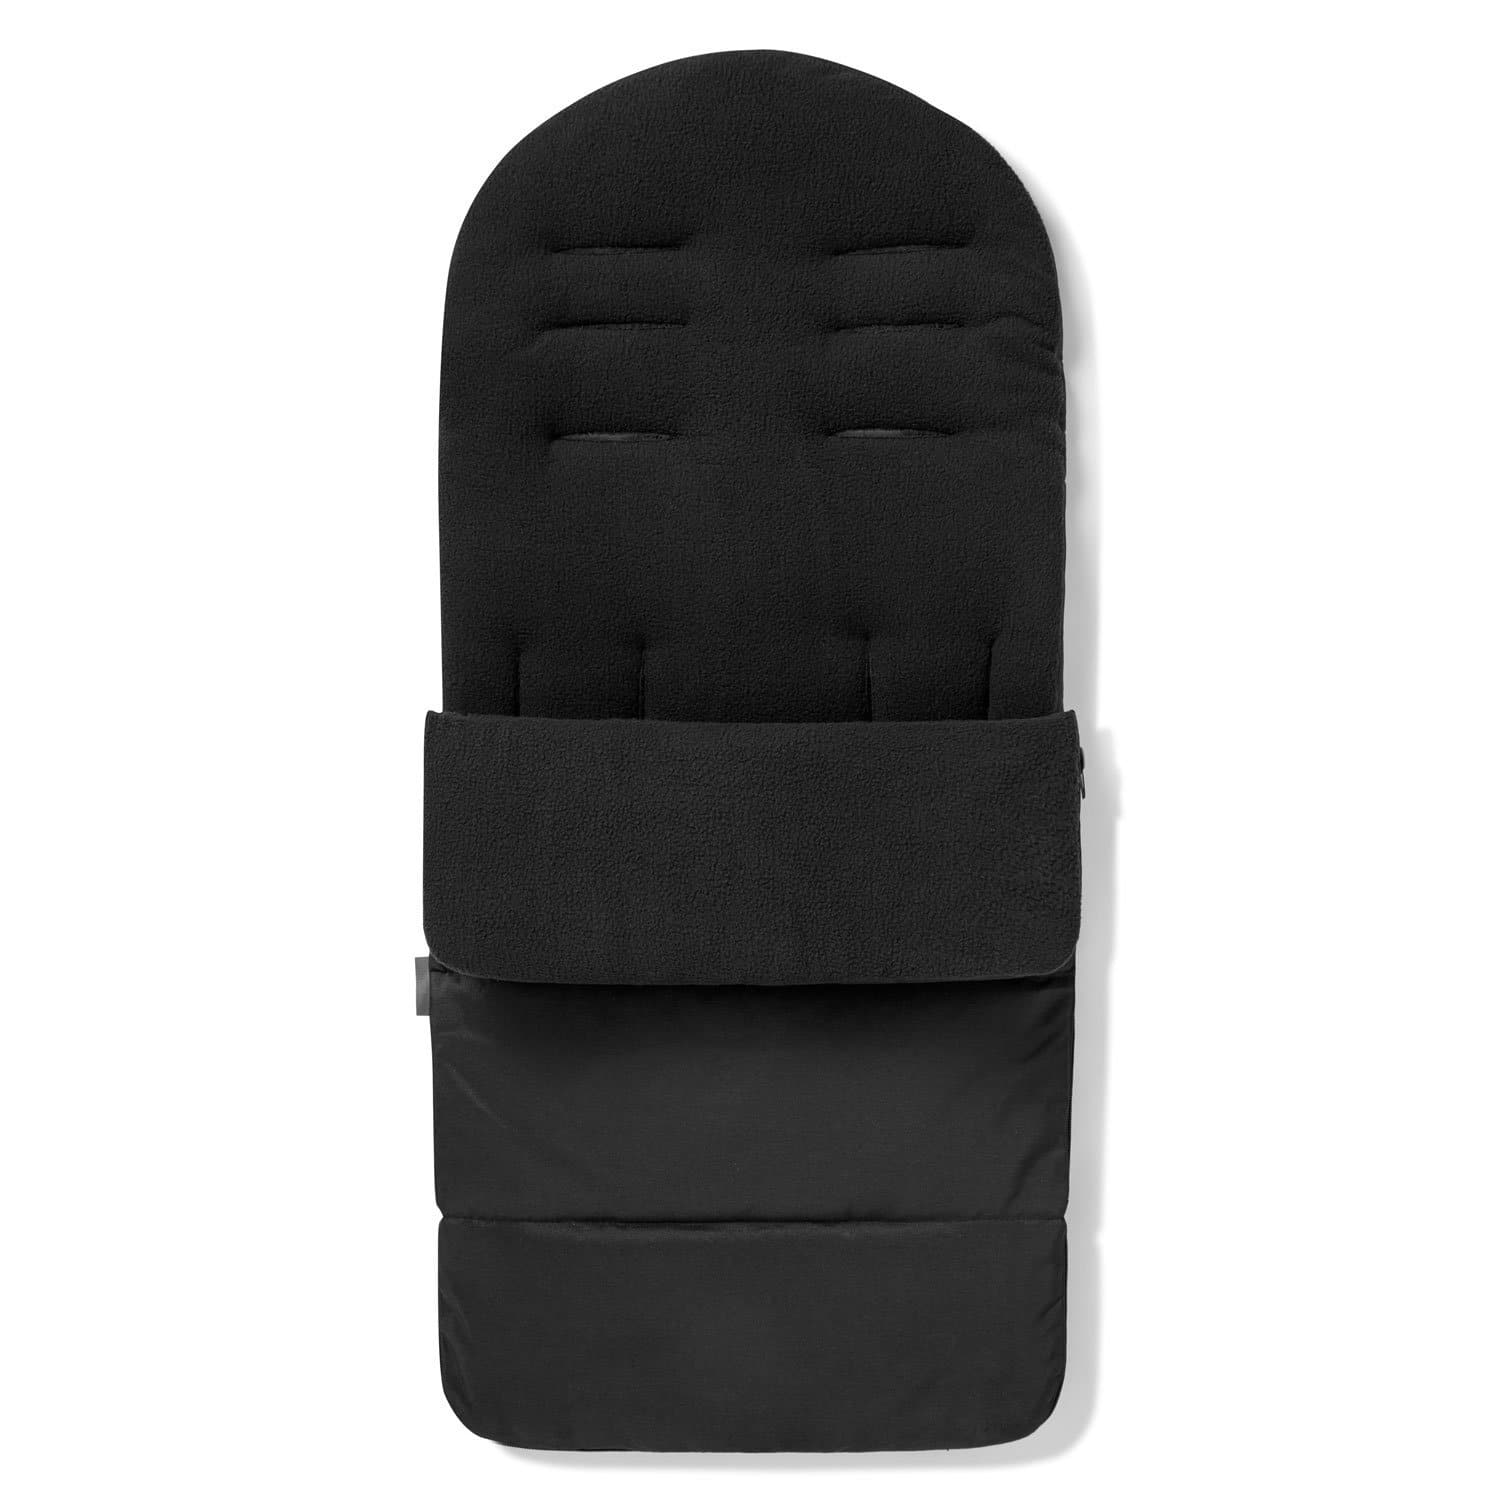 Premium Footmuff / Cosy Toes Compatible with Hybrid - Black Jack / Fits All Models | For Your Little One